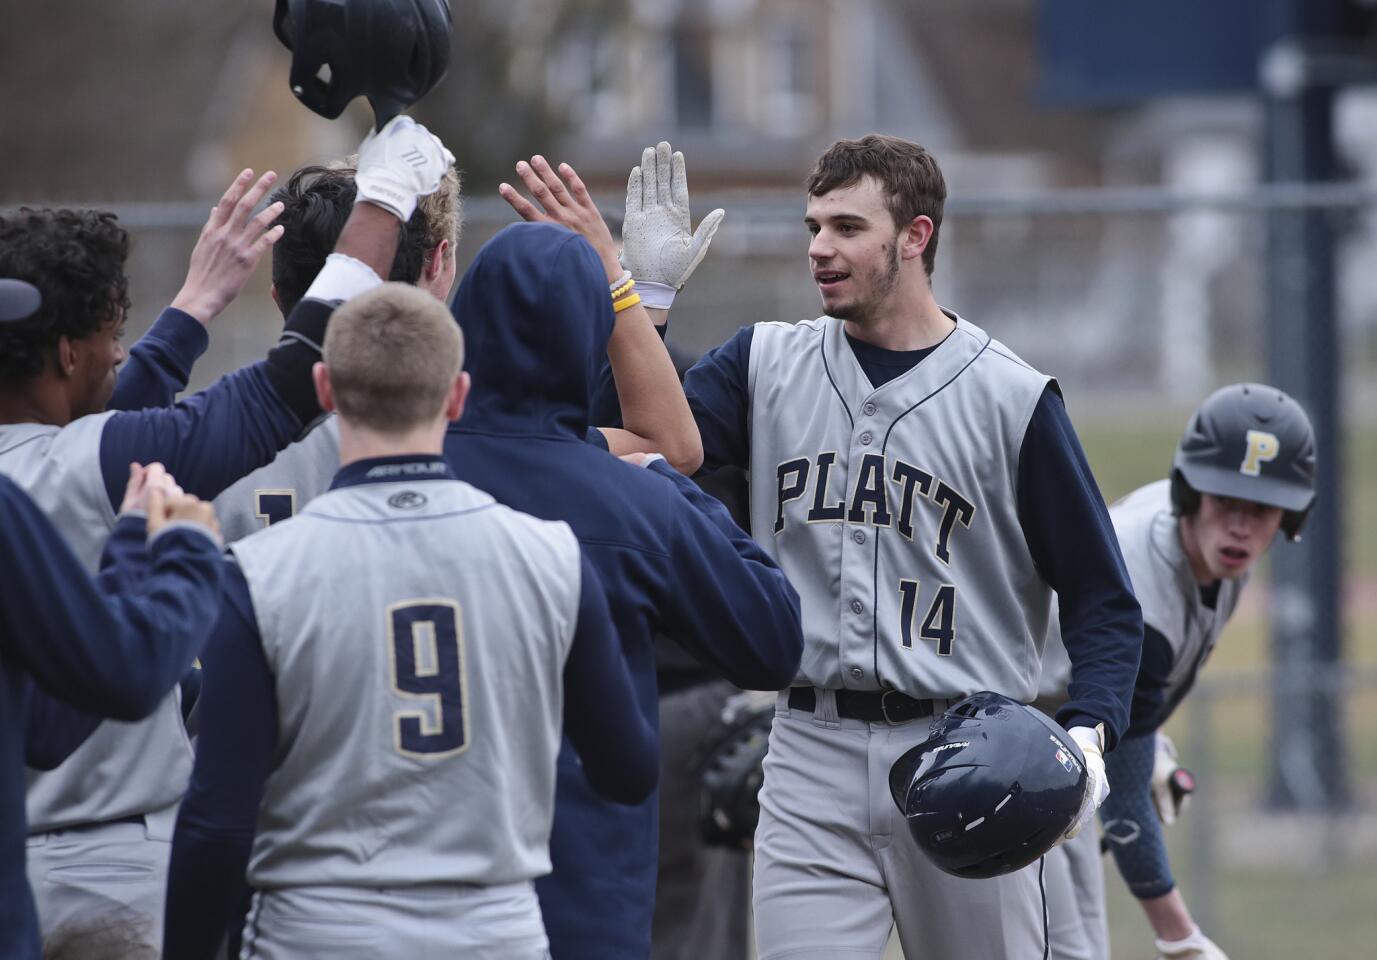 Platt's Andrew McCarty (14) gets high fives all around after hitting a 3 run home run in the 2nd inning. Platt plays Avon High School at Avon Tuesday. Michael McAndrews - Special to the Hartford Courant